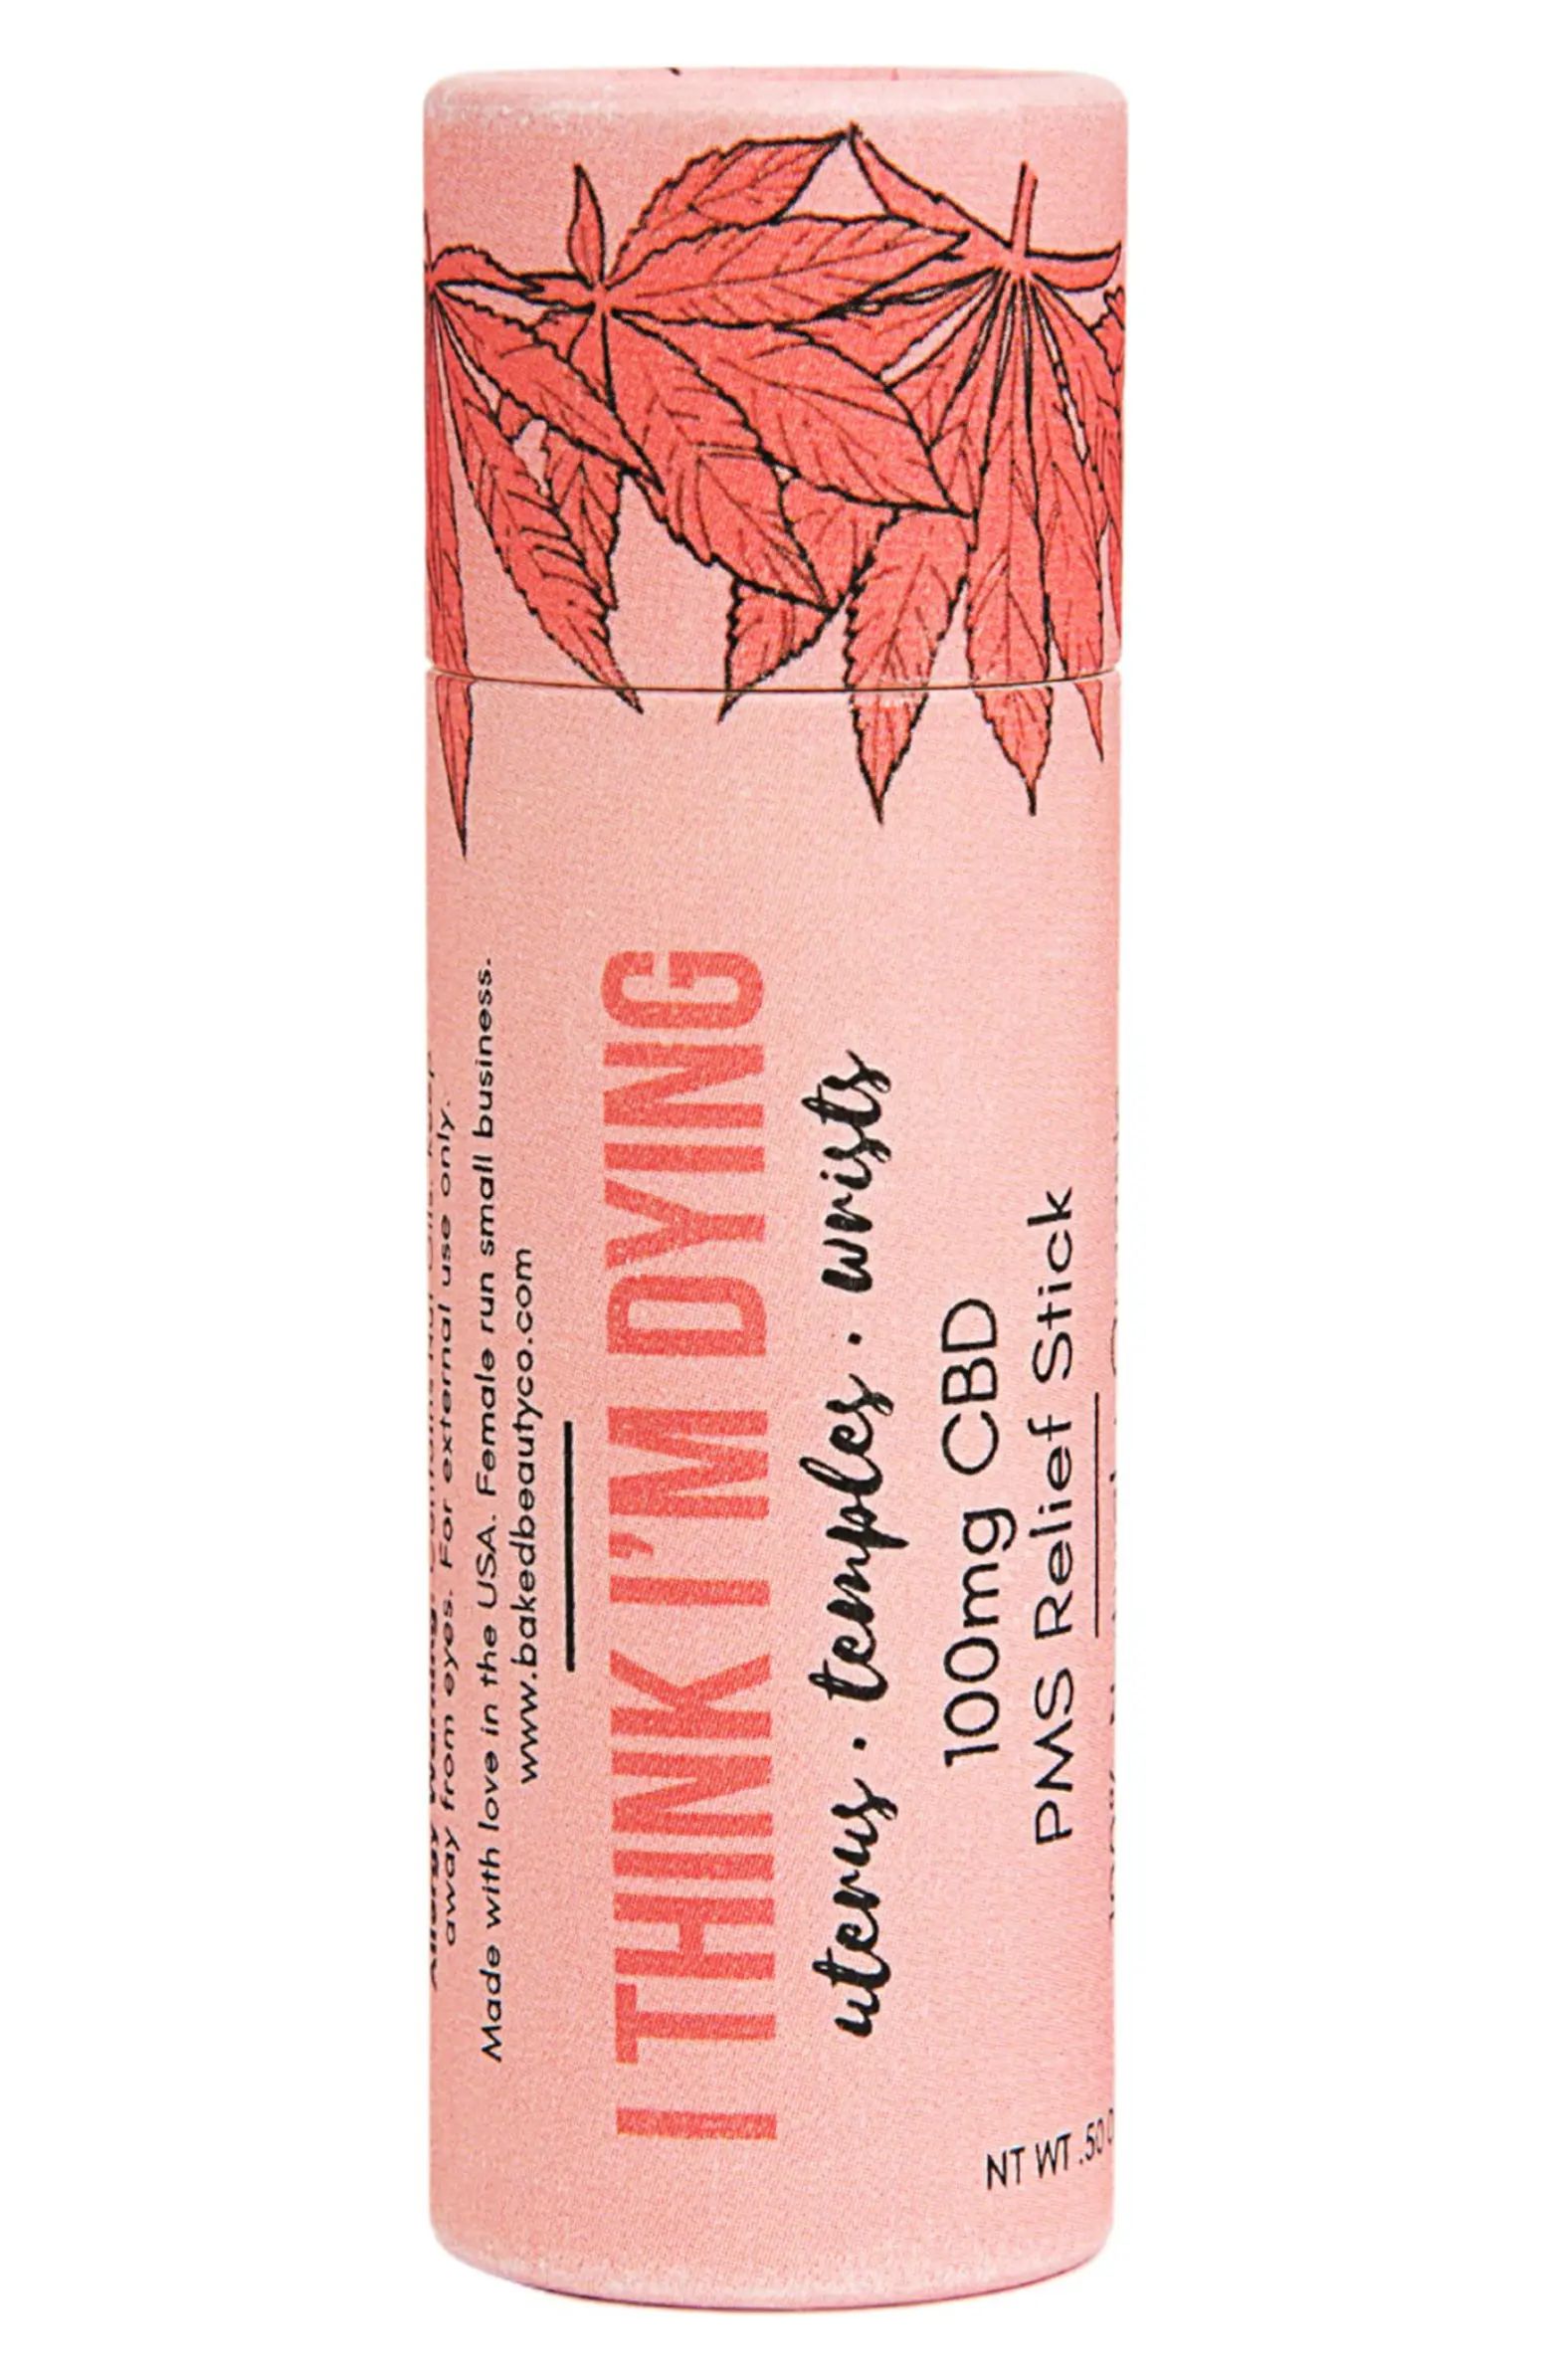 Baked Beauty Co. I Think I'm Dying CBD PMS Stick | Nordstrom | Nordstrom